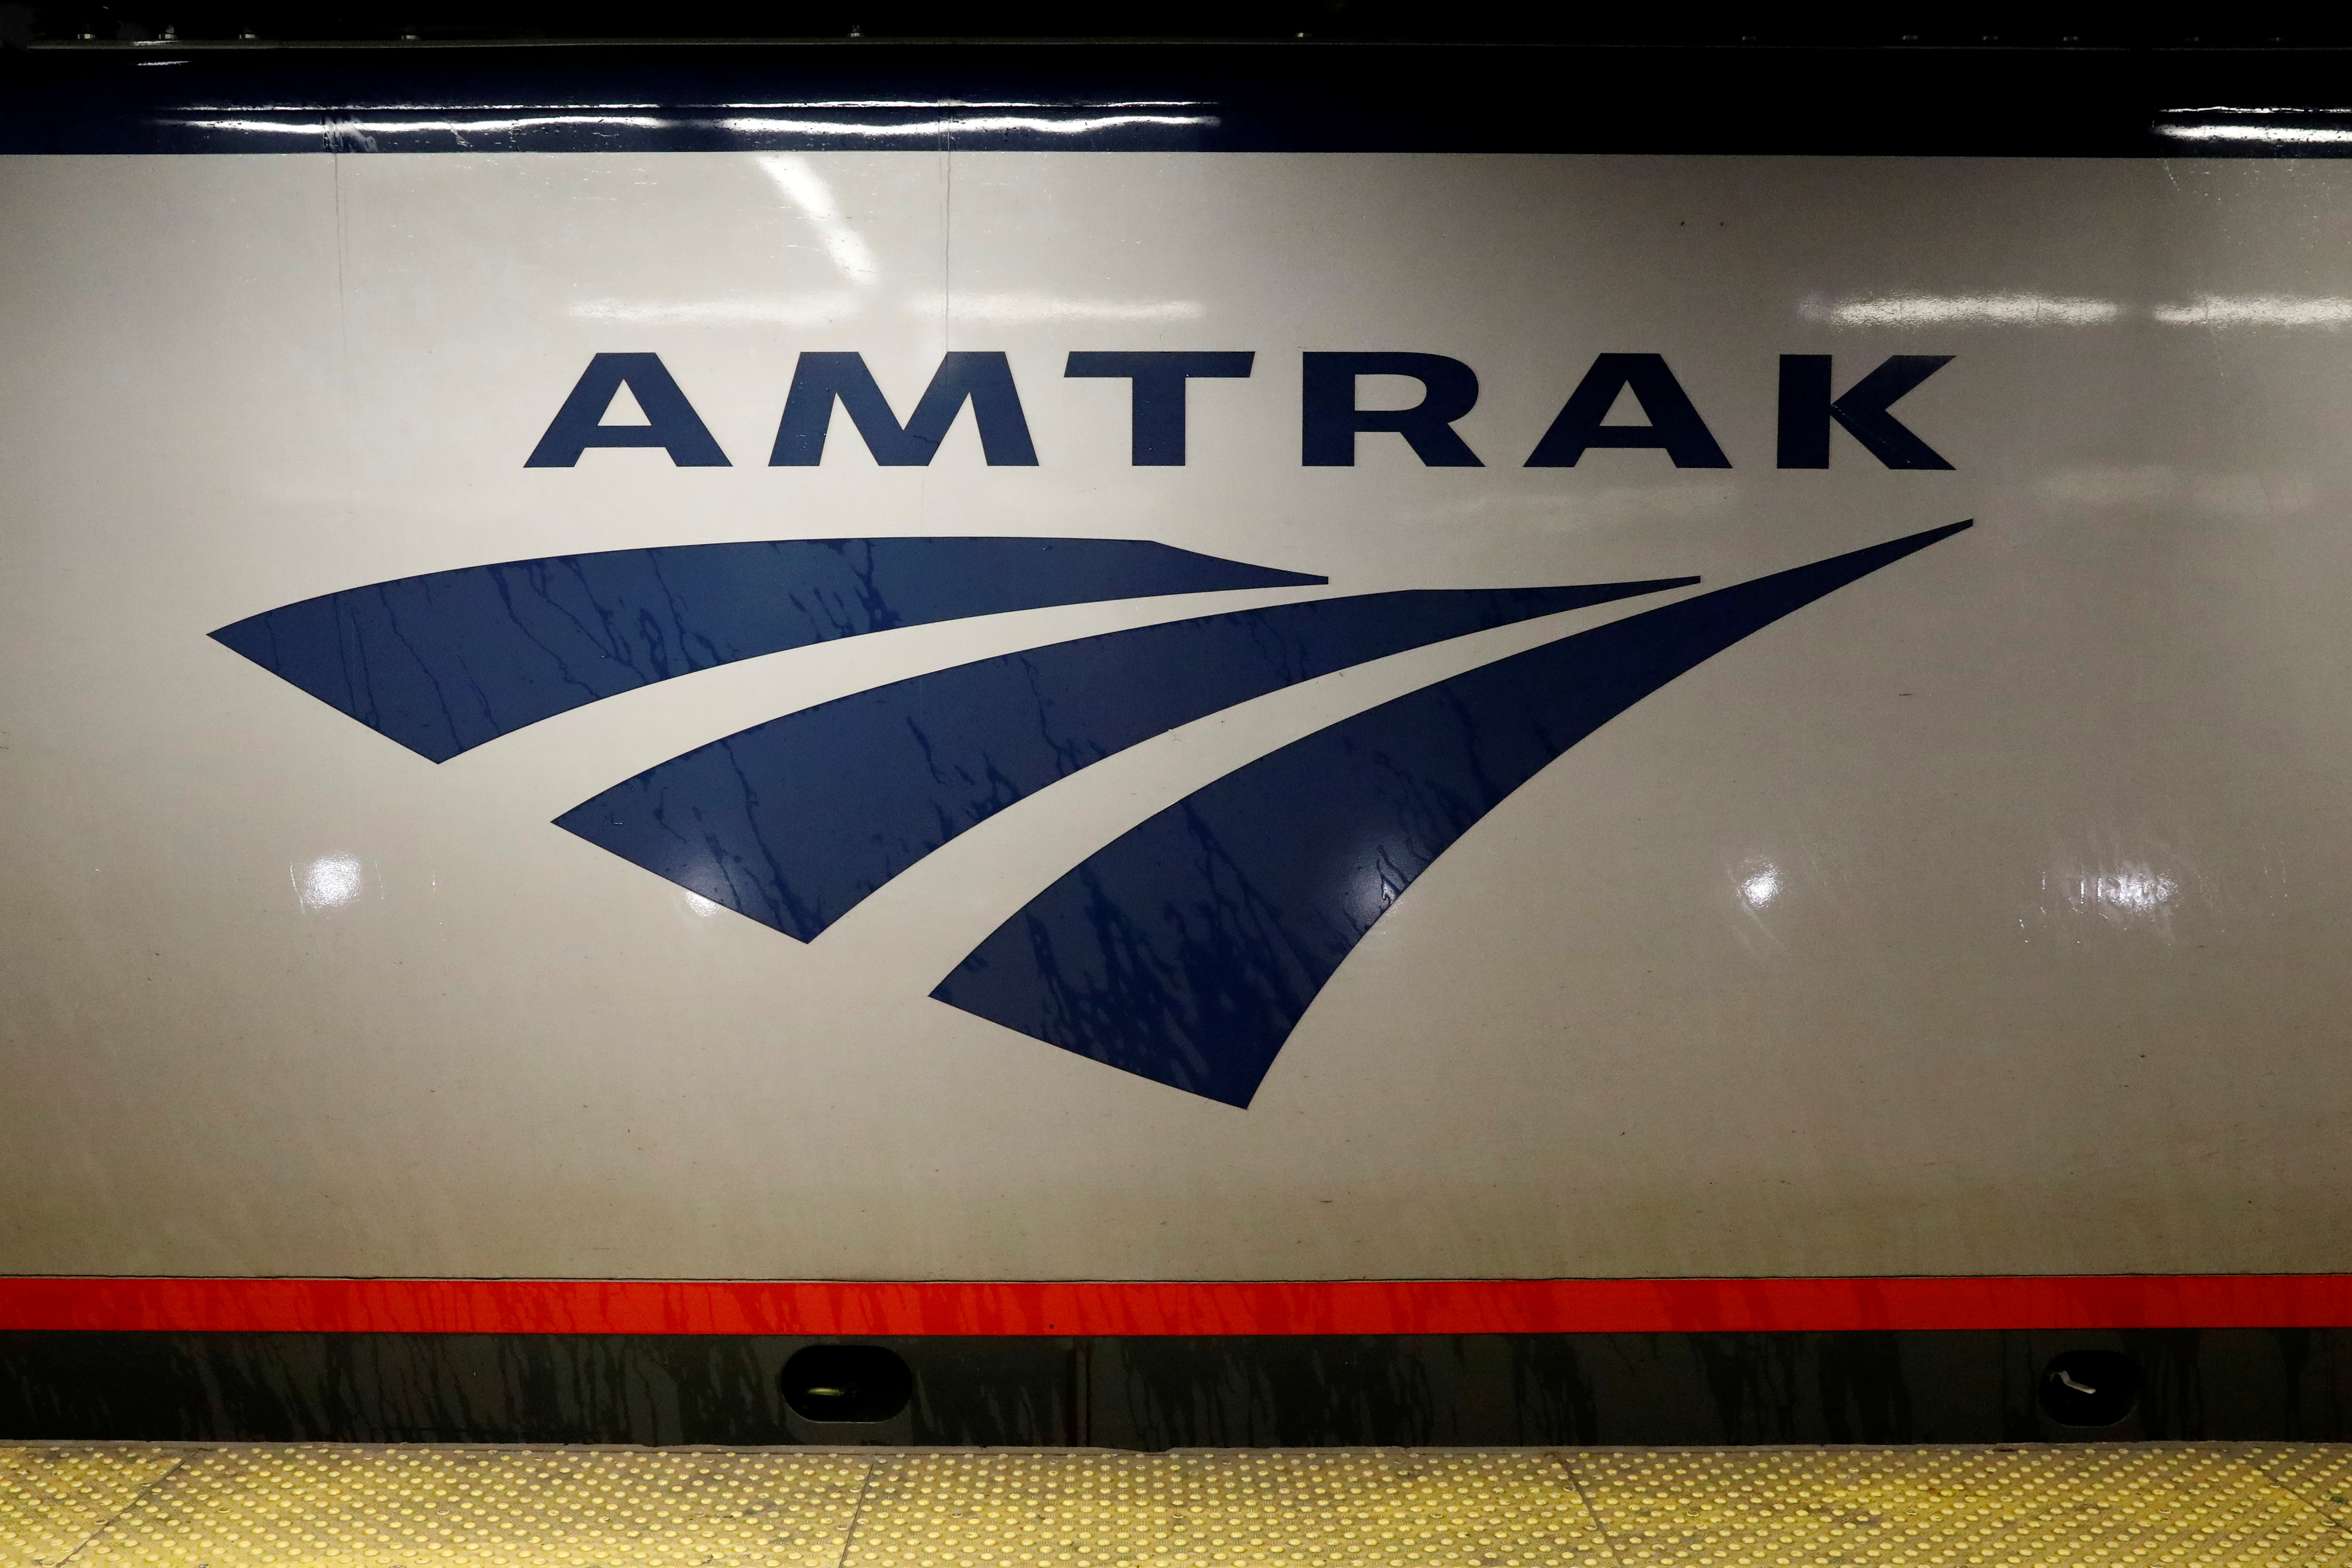 An Amtrak train is parked at the platform inside New York's Penn Station, the nation's busiest train hub, which will be closing tracks for repairs causing massive disruptions to commuters in New York City